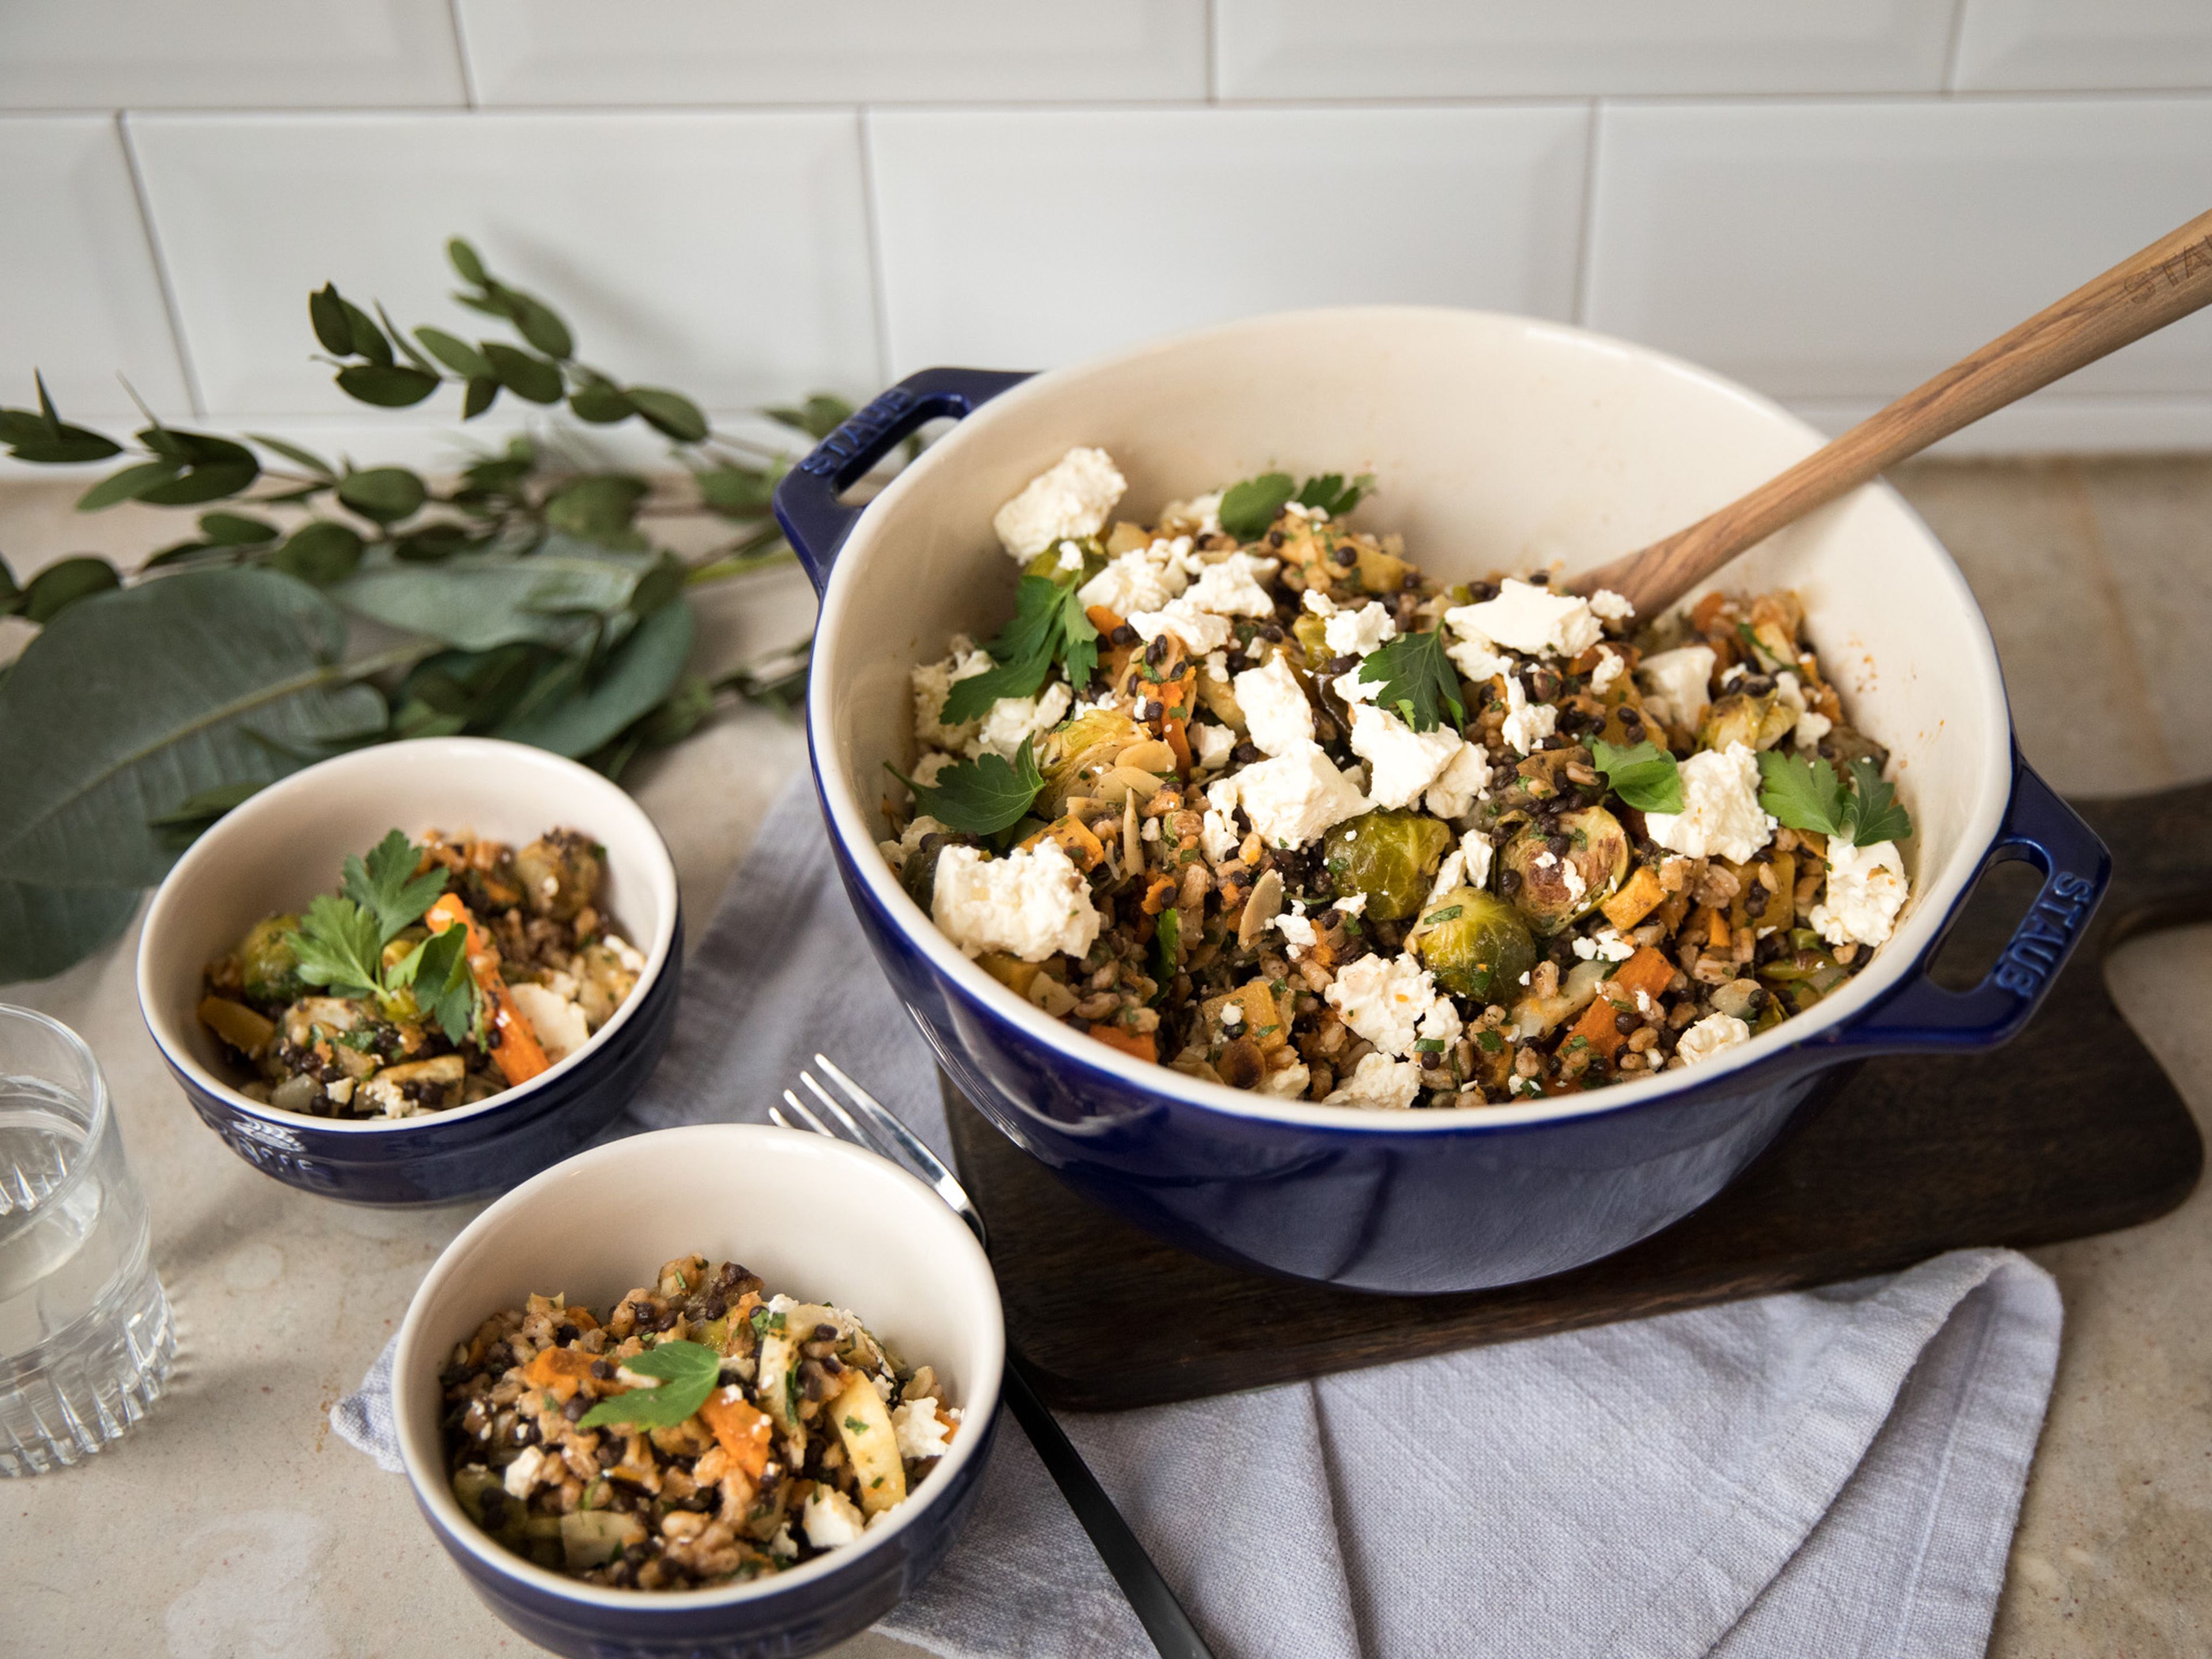 Lentil salad with roasted vegetables and feta cheese